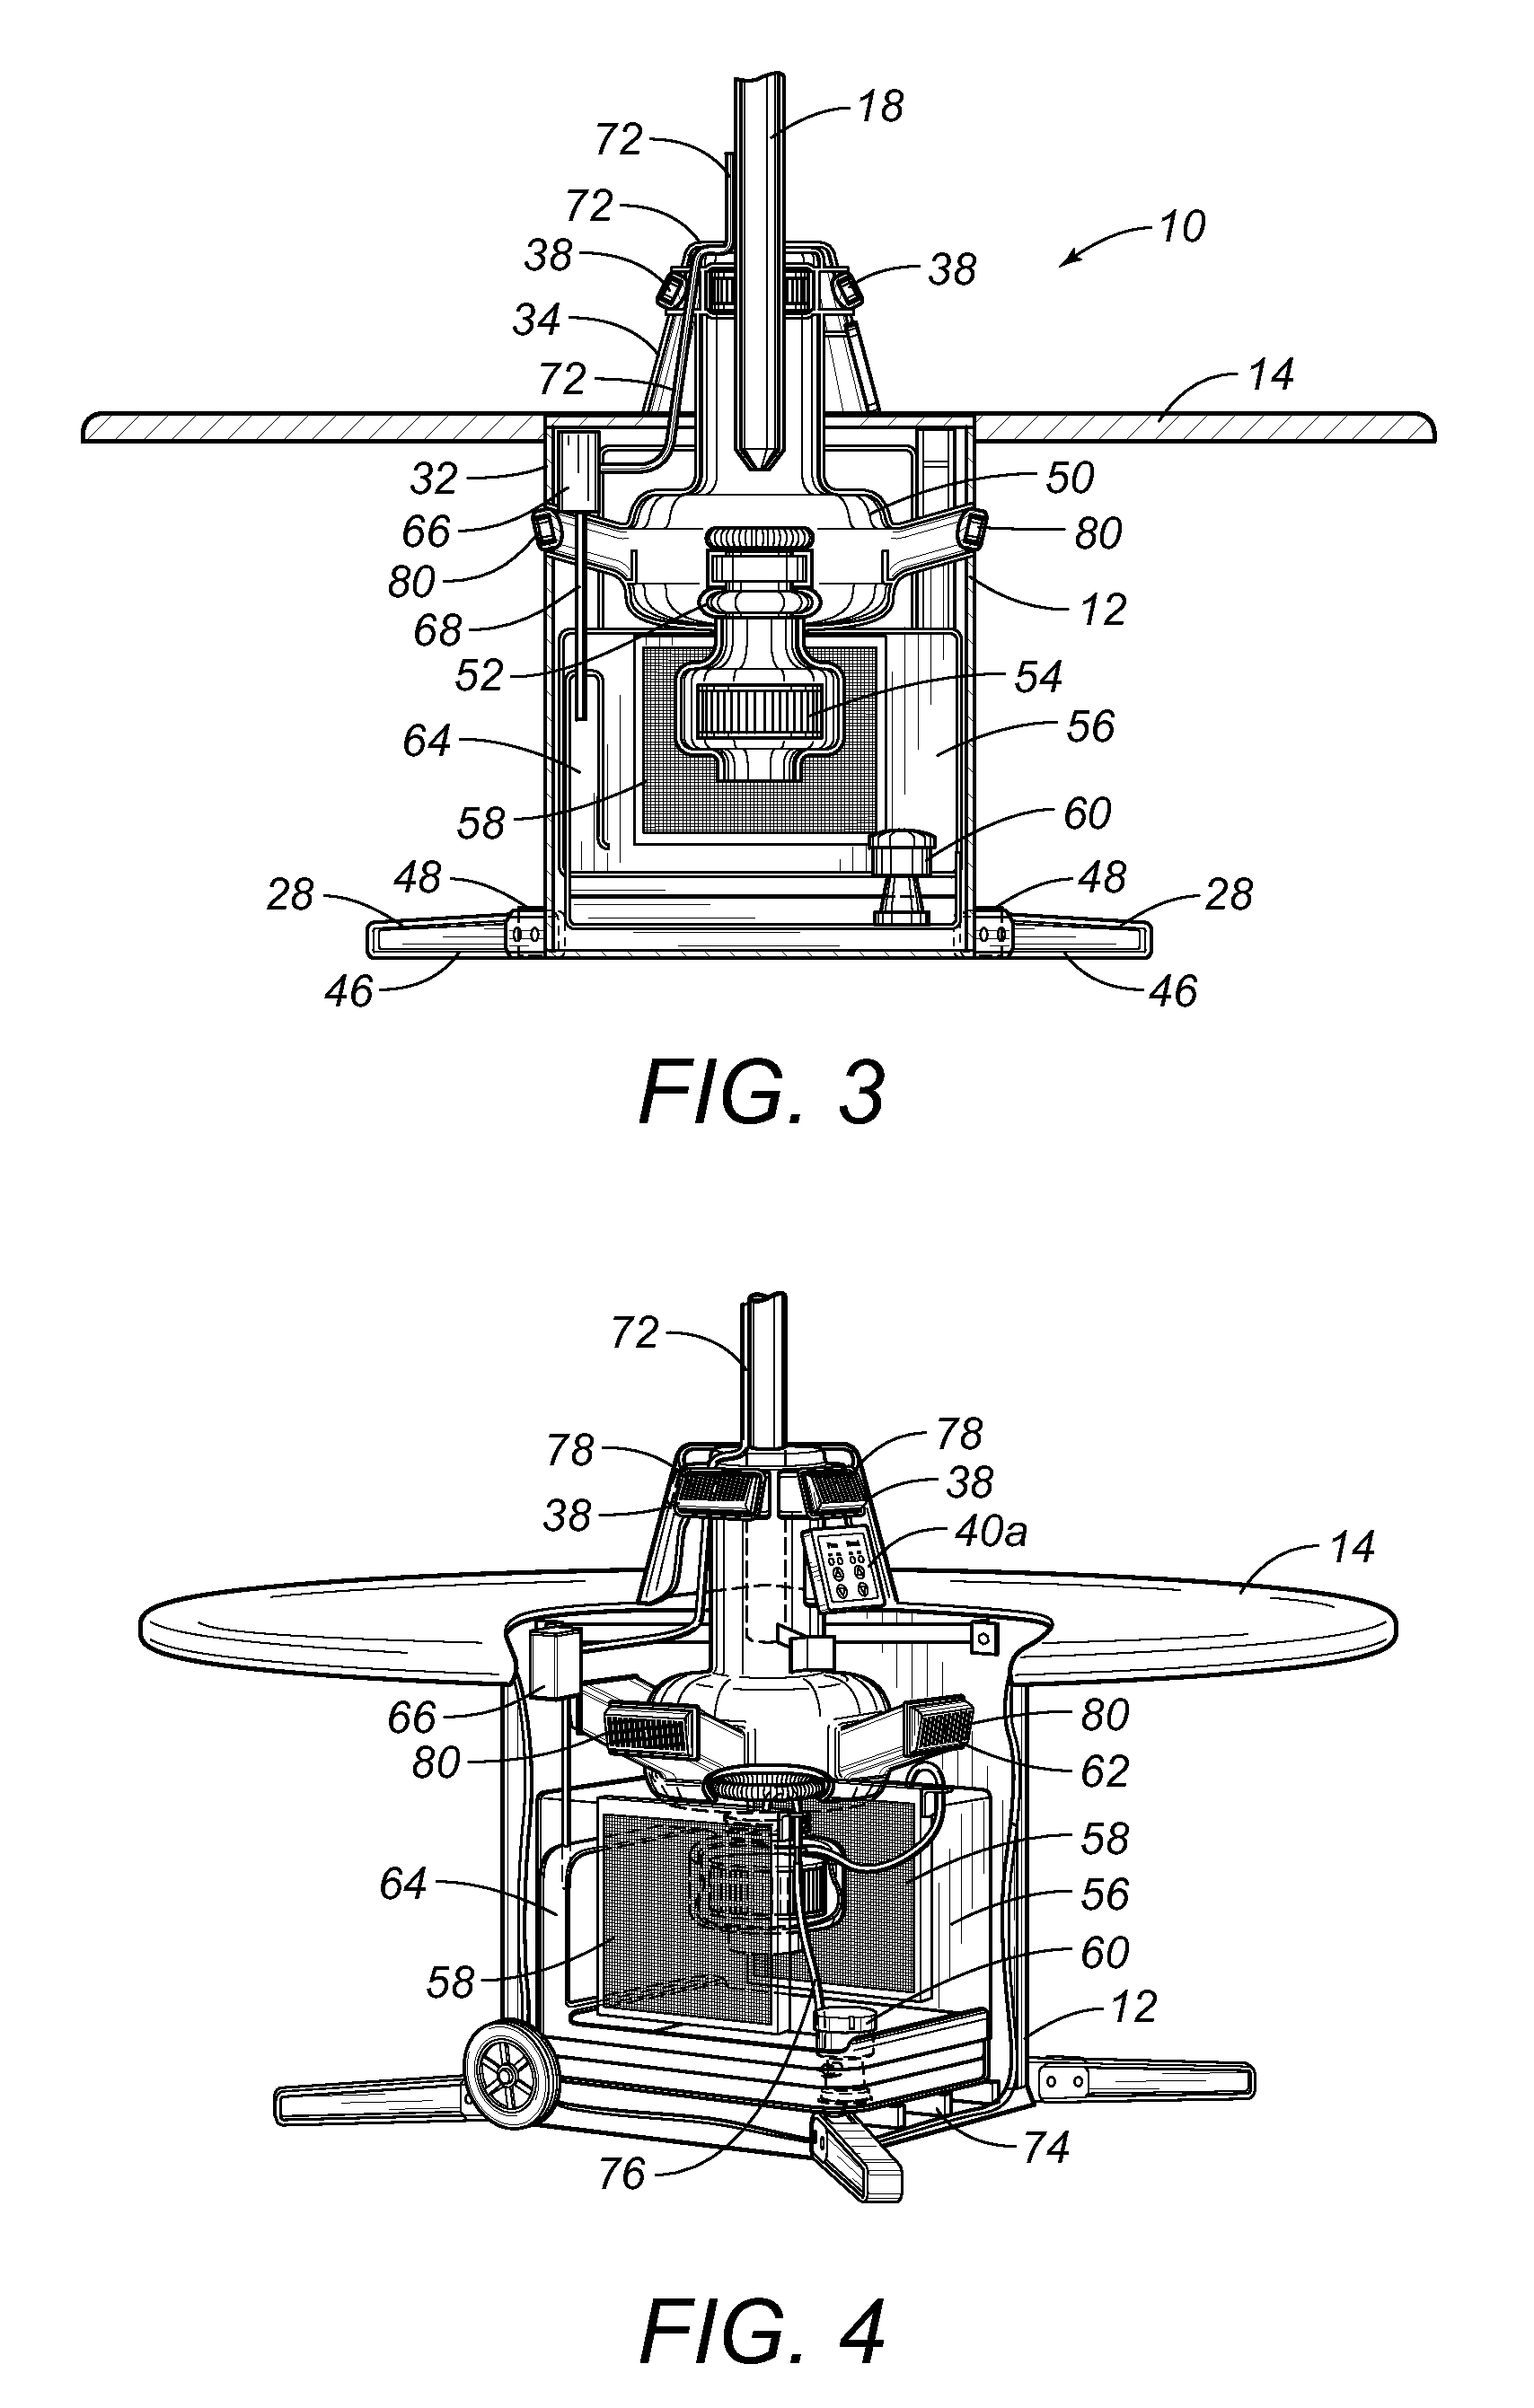 Table umbrella apparatus with air treating system